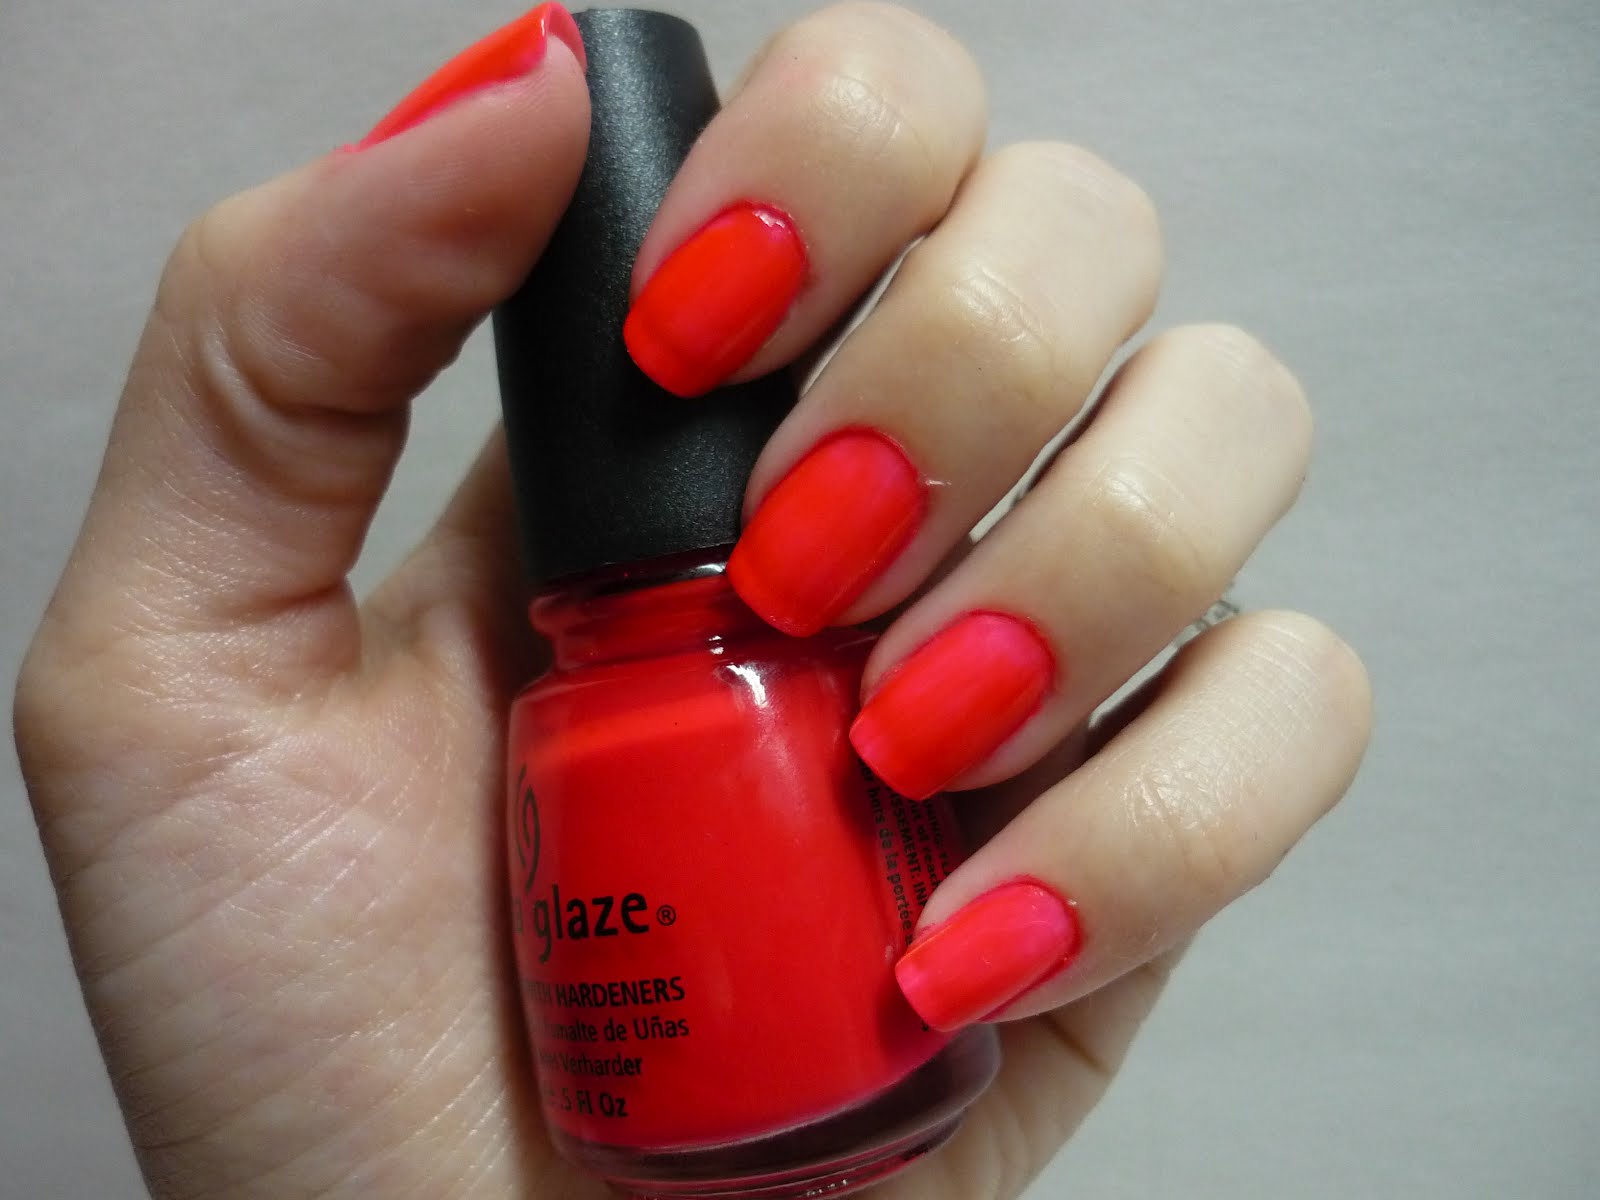 4. China Glaze Nail Lacquer in "Rose Among Thorns" - wide 7